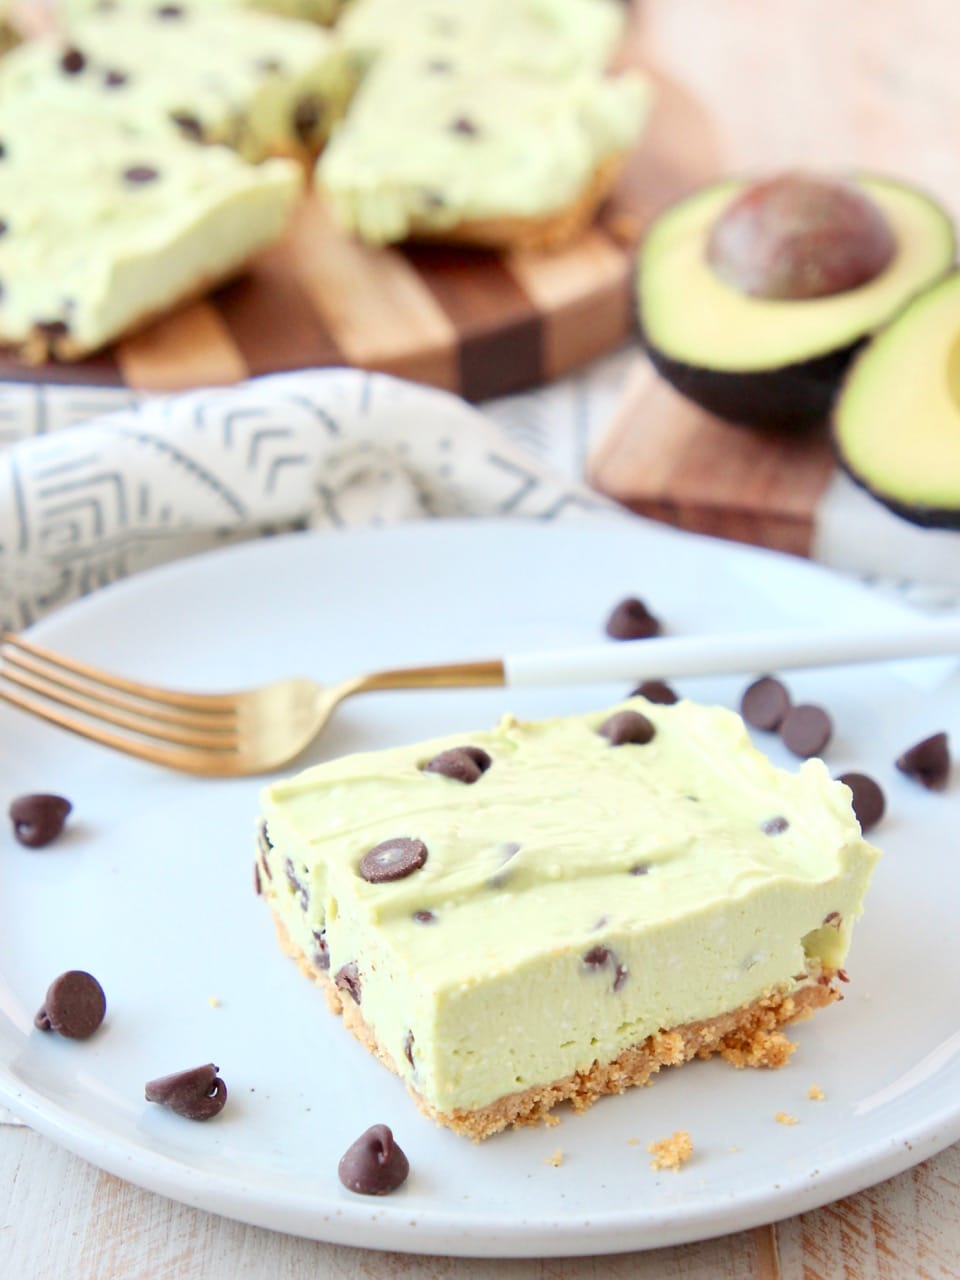 Avocado cheesecake bar with graham cracker crust on white plate with gold fork and chocolate chips